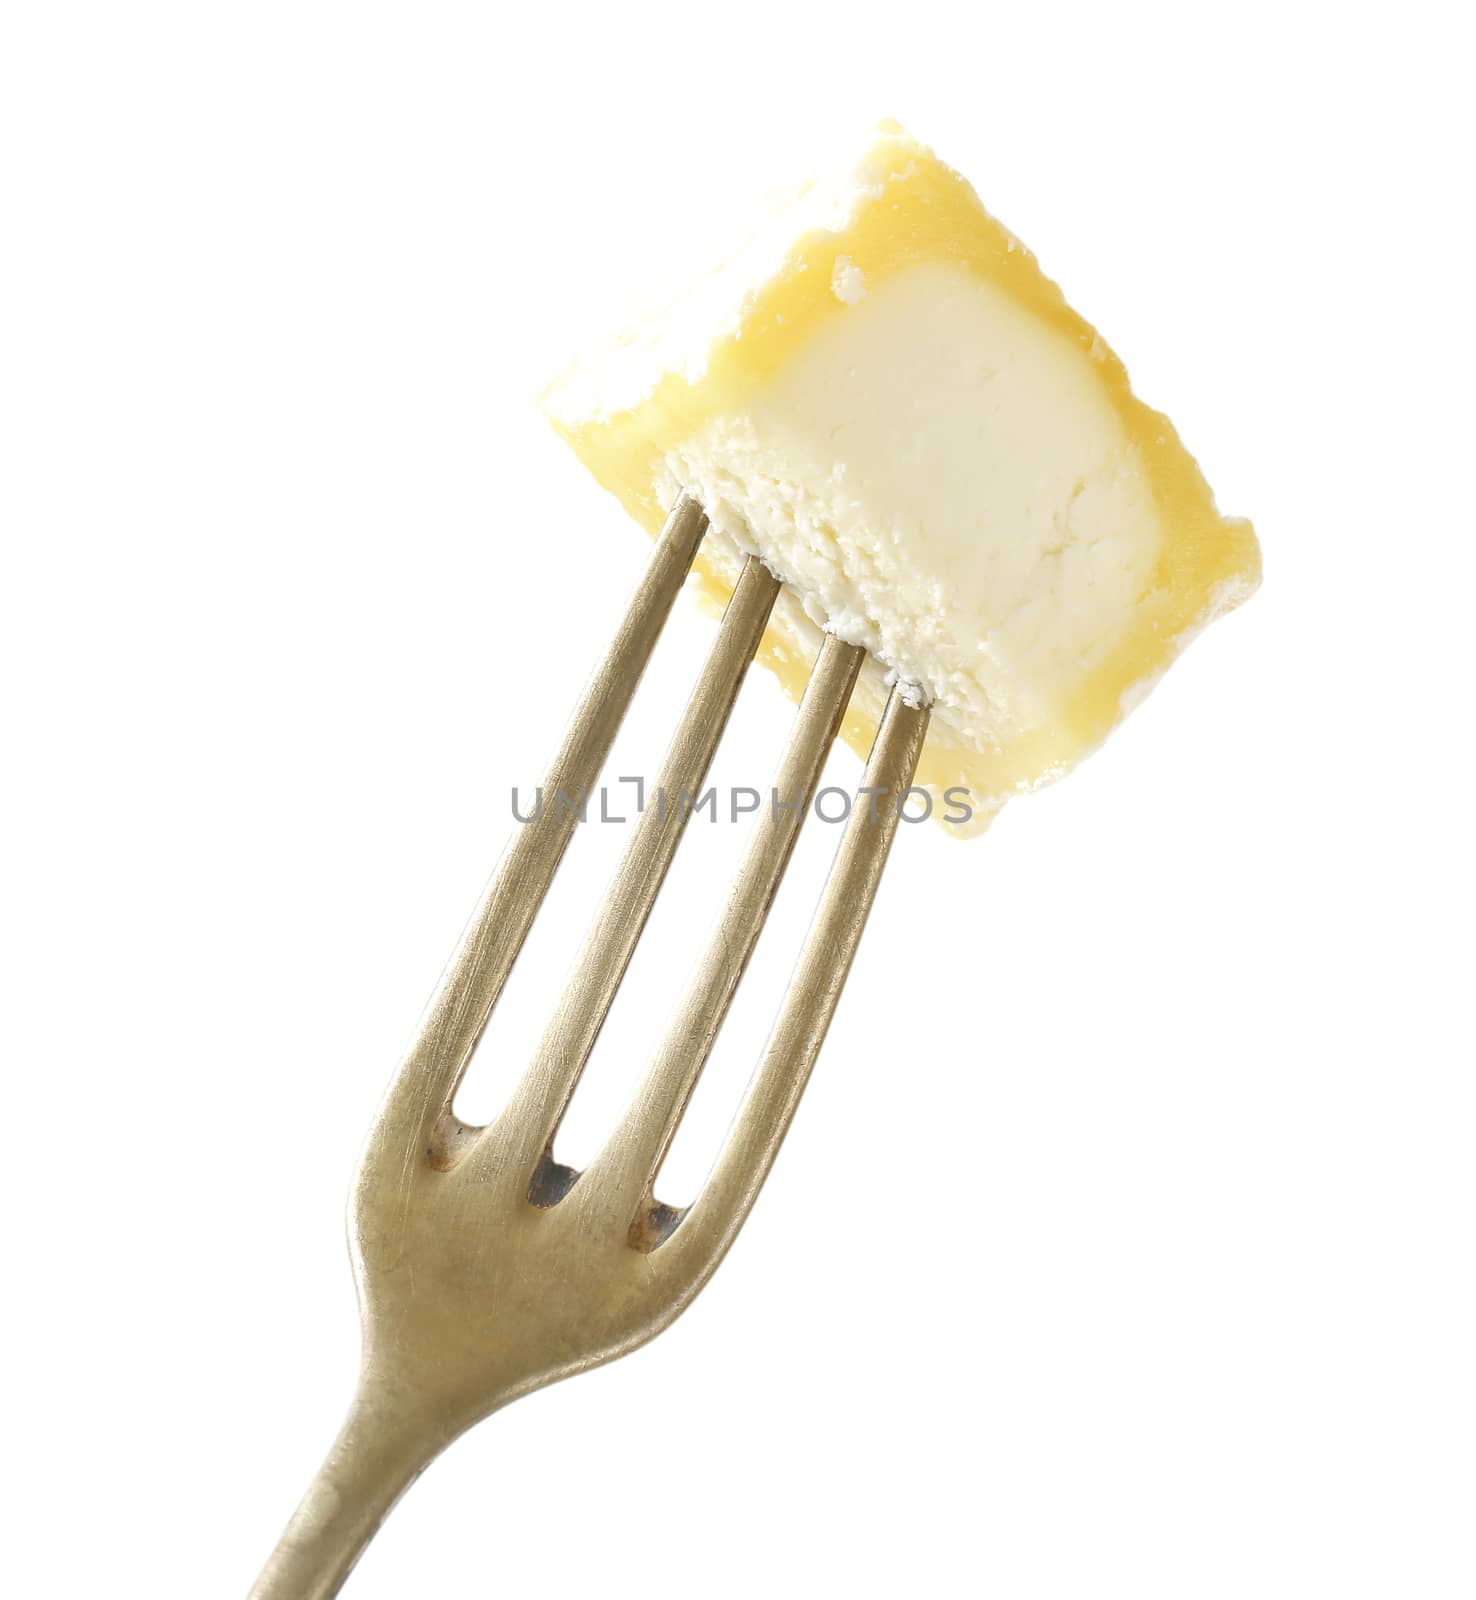 Piece of Chevre cheese on fork